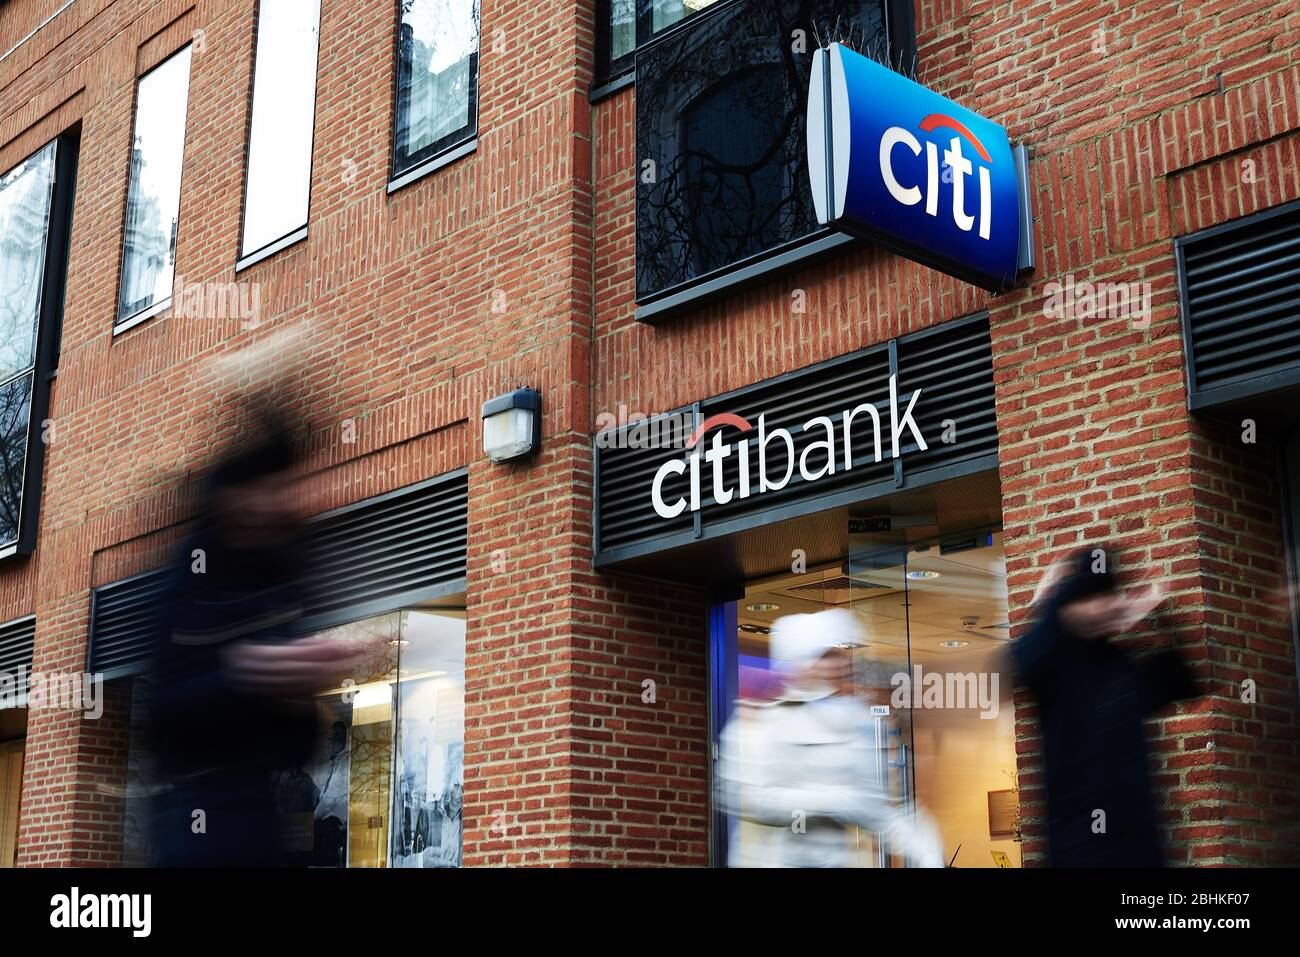 Citibank branch exterior with sign in London Stock Photo